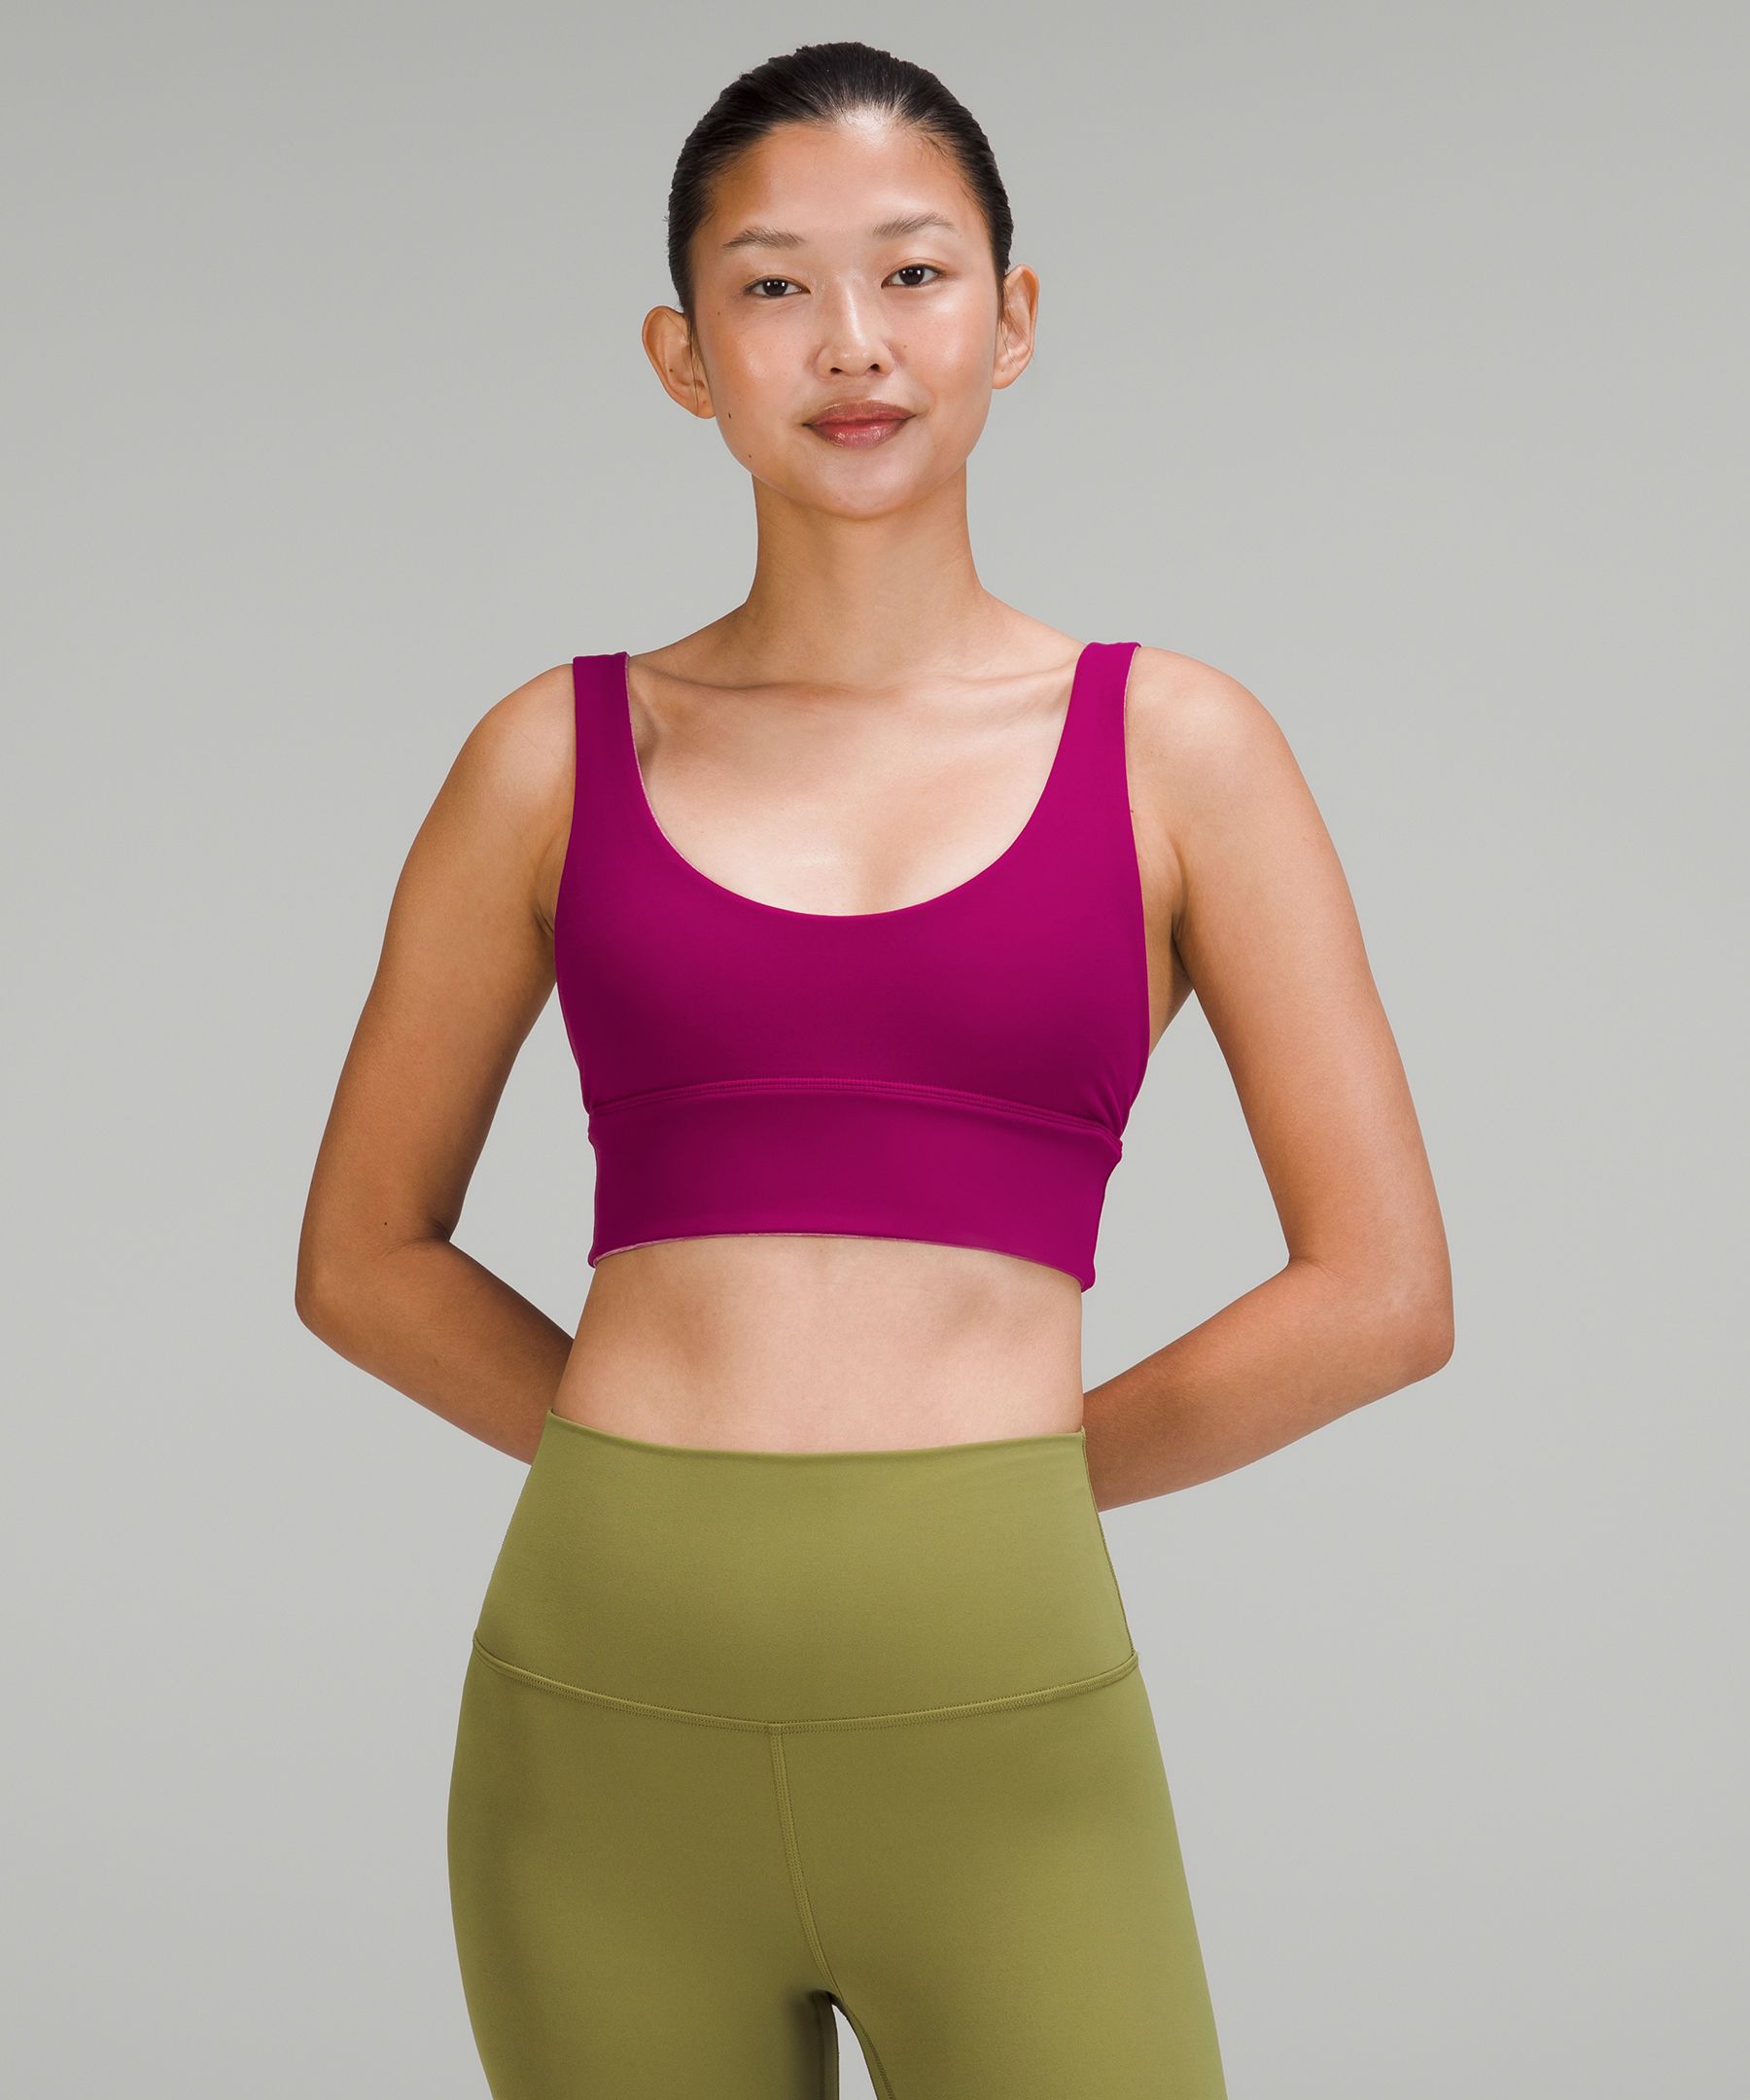 Lululemon Align™ Reversible Bra Light Support, A/b Cup In Pink